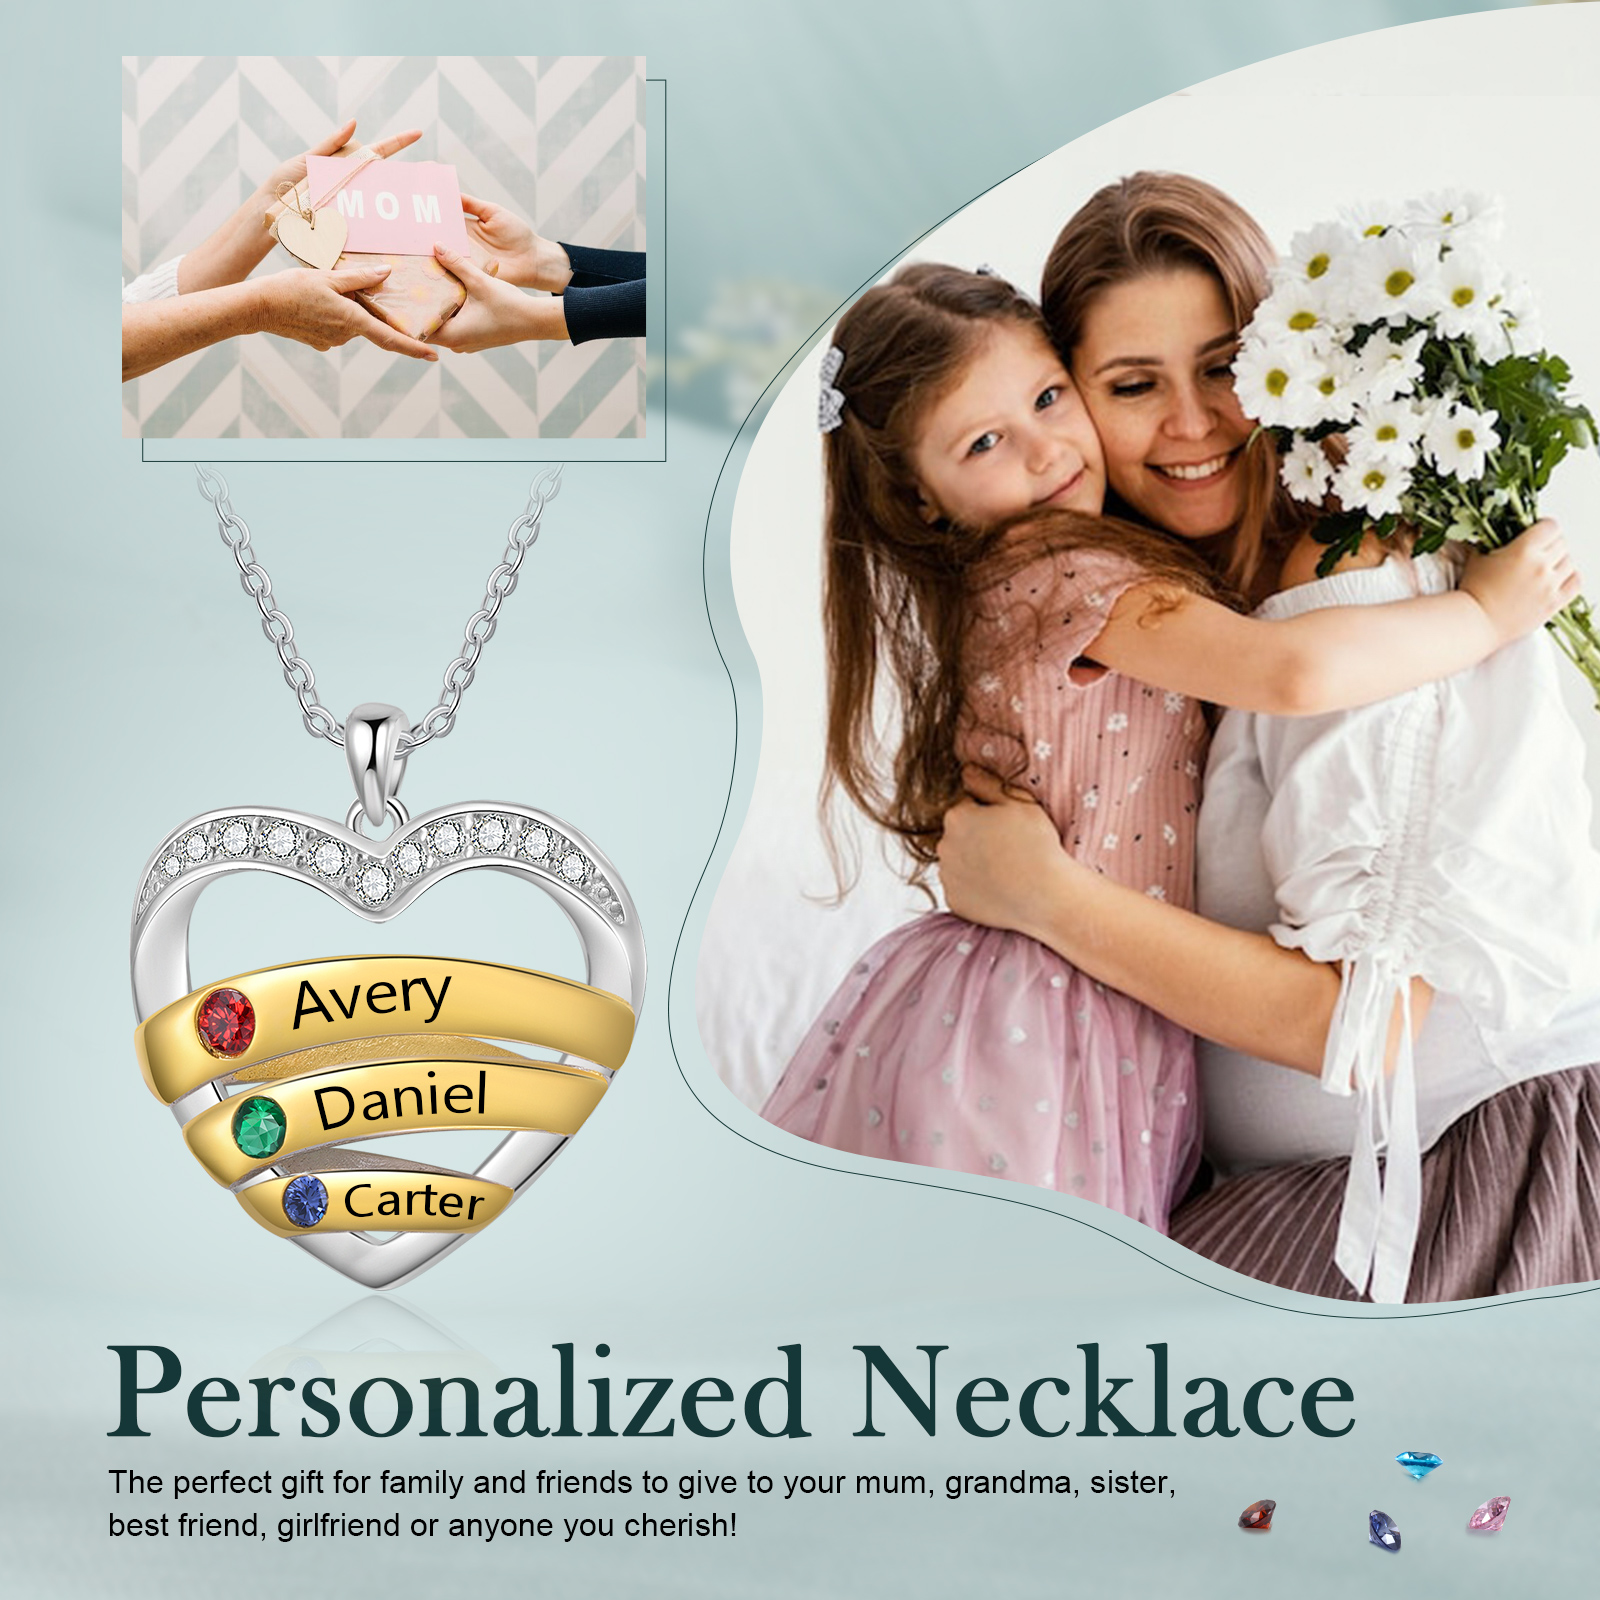 3 Names - Personalized Beautiful Heart Necklace with Custom Name and Birthstone, As a Mother's Day Gift for Mom